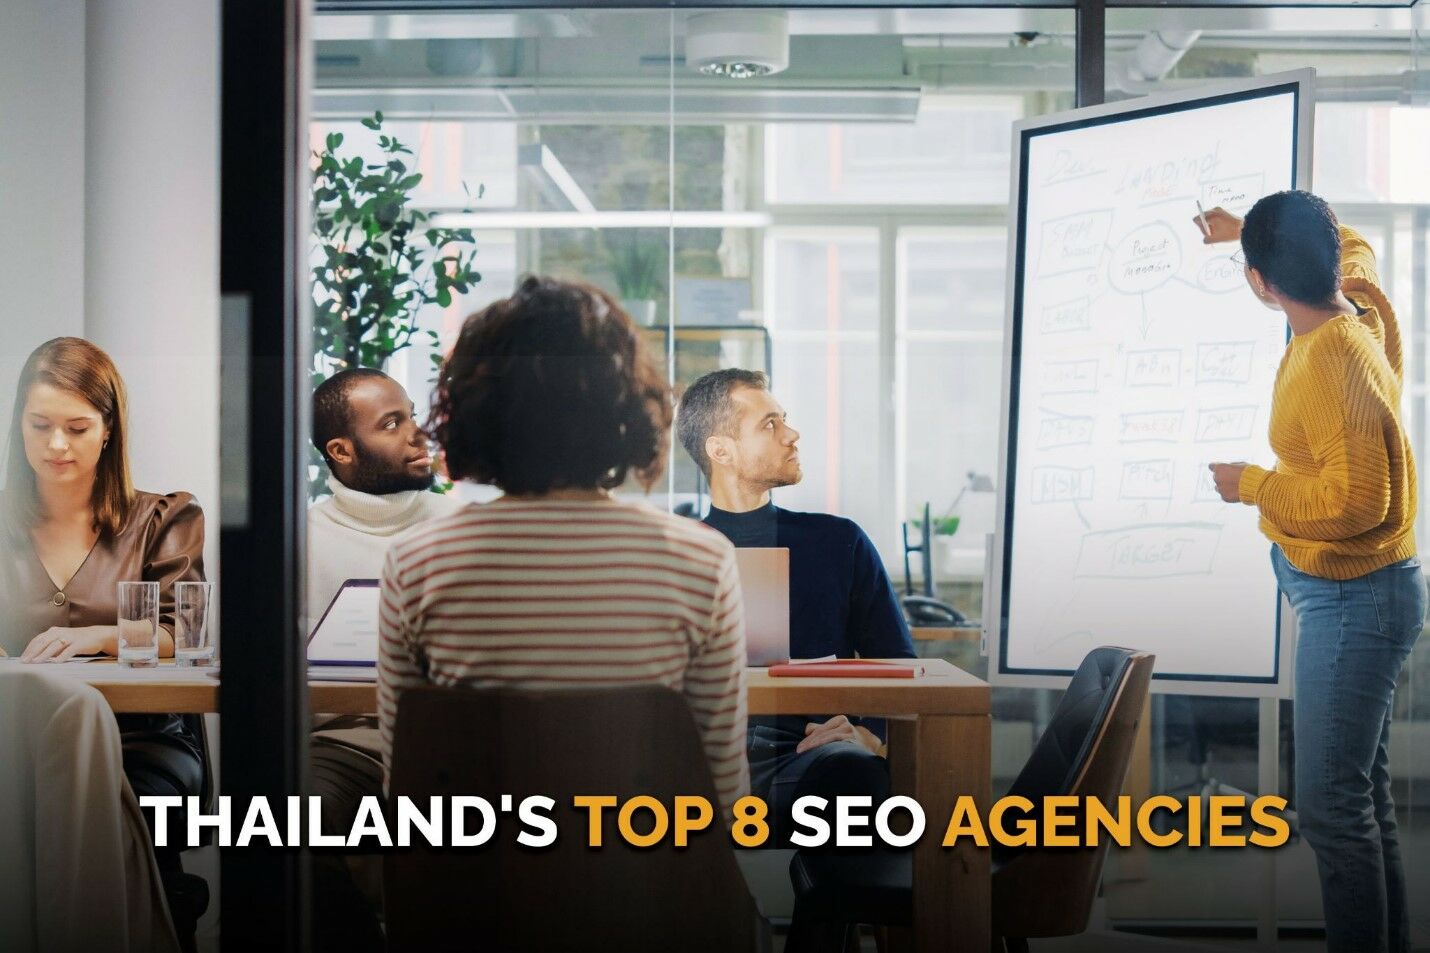 The 8 Best SEO Agencies in Thailand